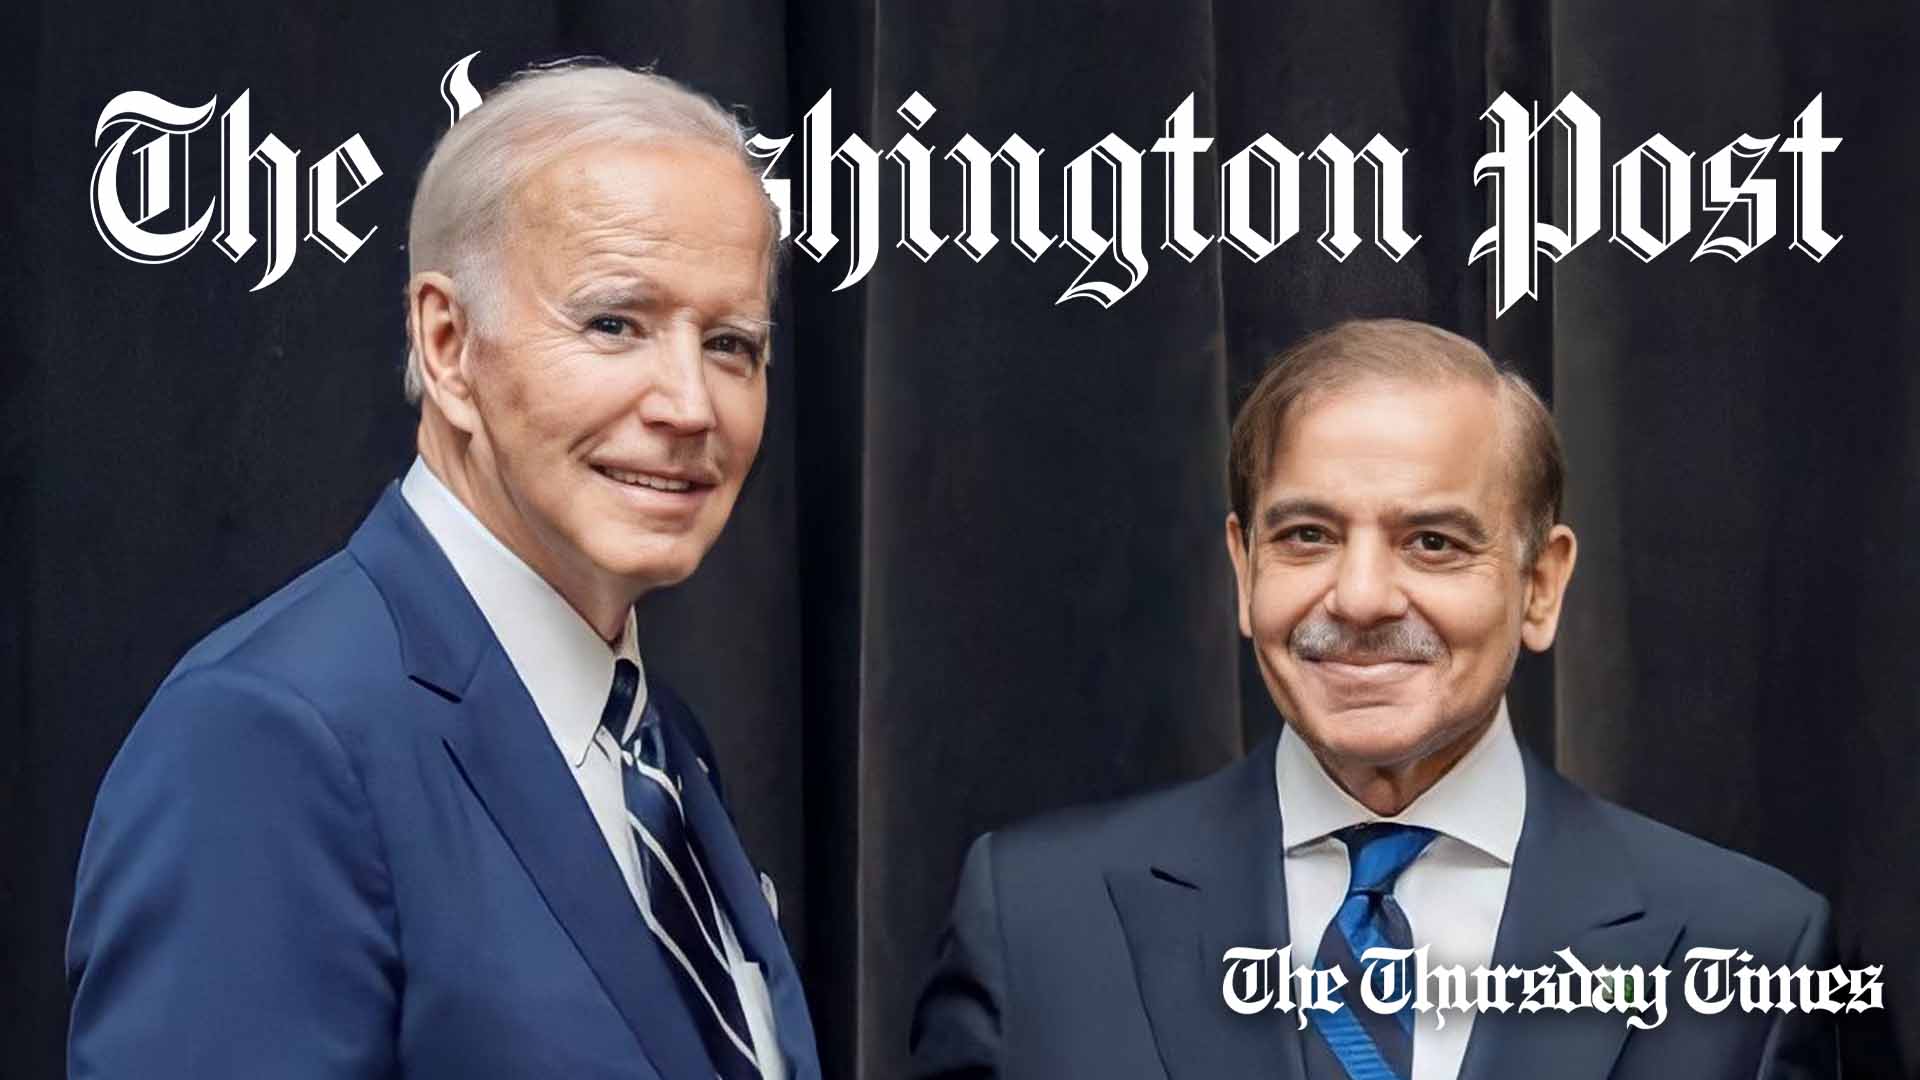 A file photo is shown of Pakistani prime minister Shehbaz Sharif alongside U.S. president Joe Biden at the sidelines of the 77th UNGA in 2022. — FILE/THE THURSDAY TIMES